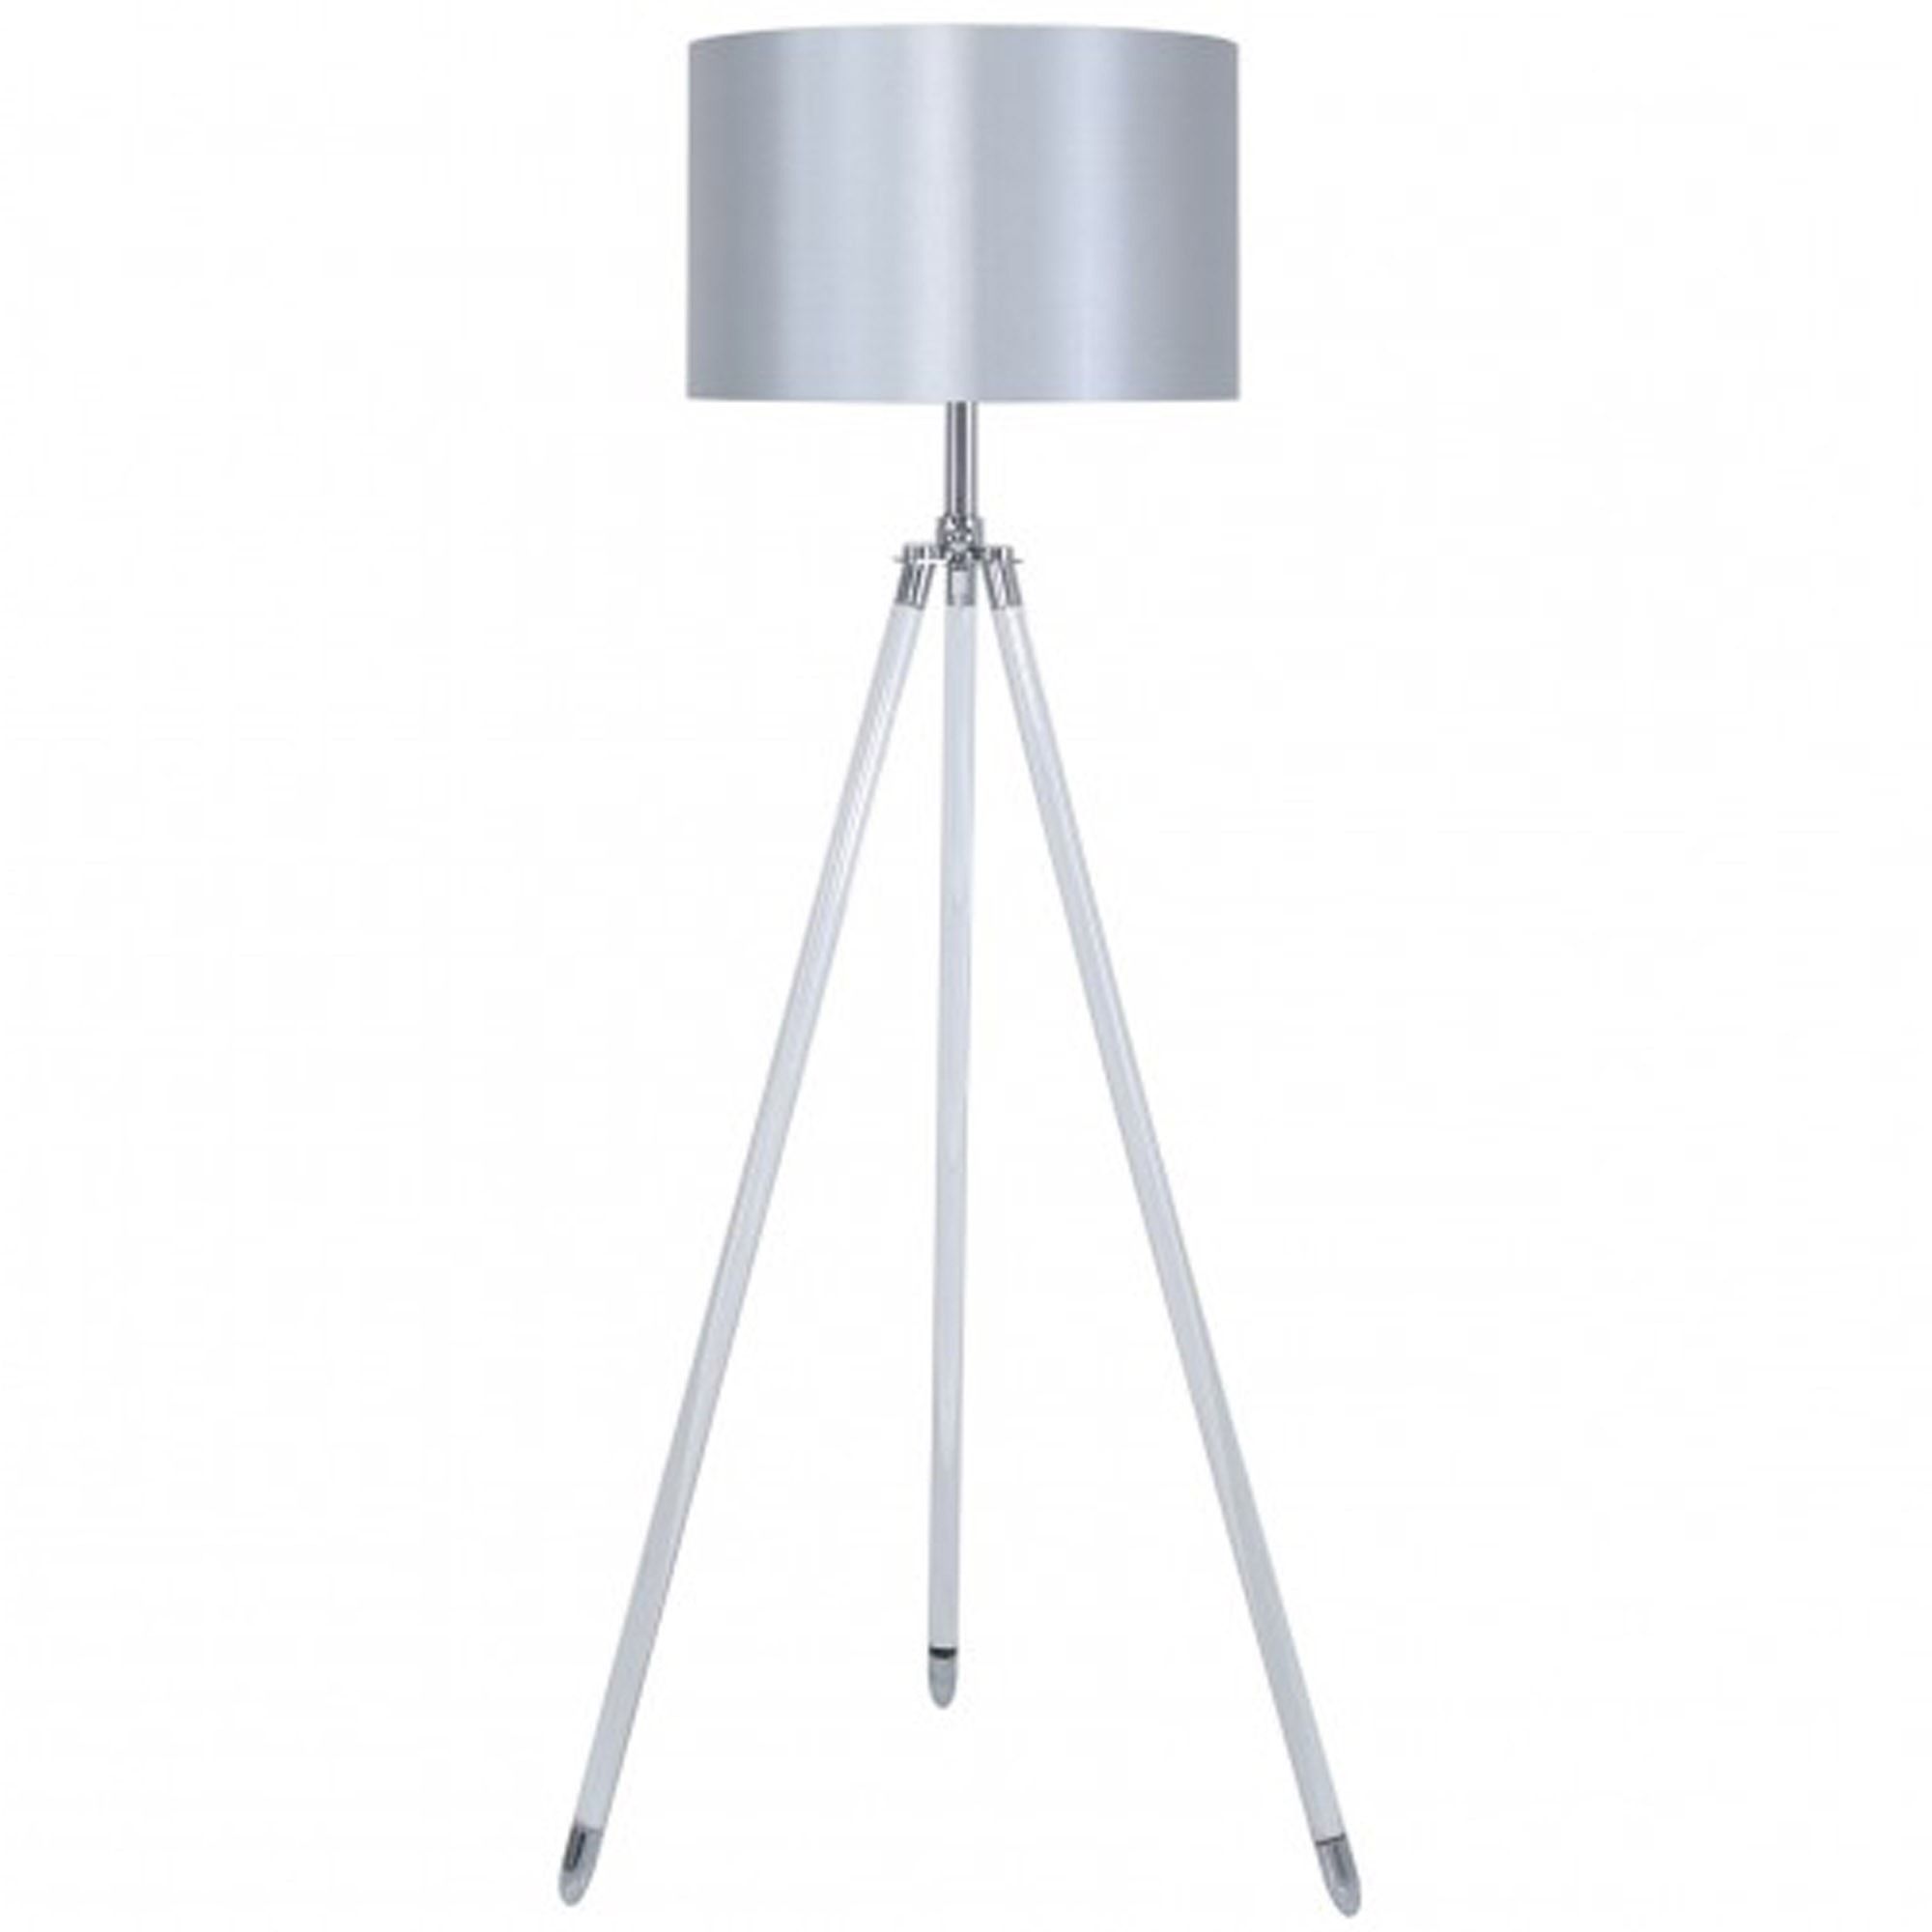 Floor Standing Lamps Throughout Fashionable Acrylic Standing Lamps (View 11 of 15)